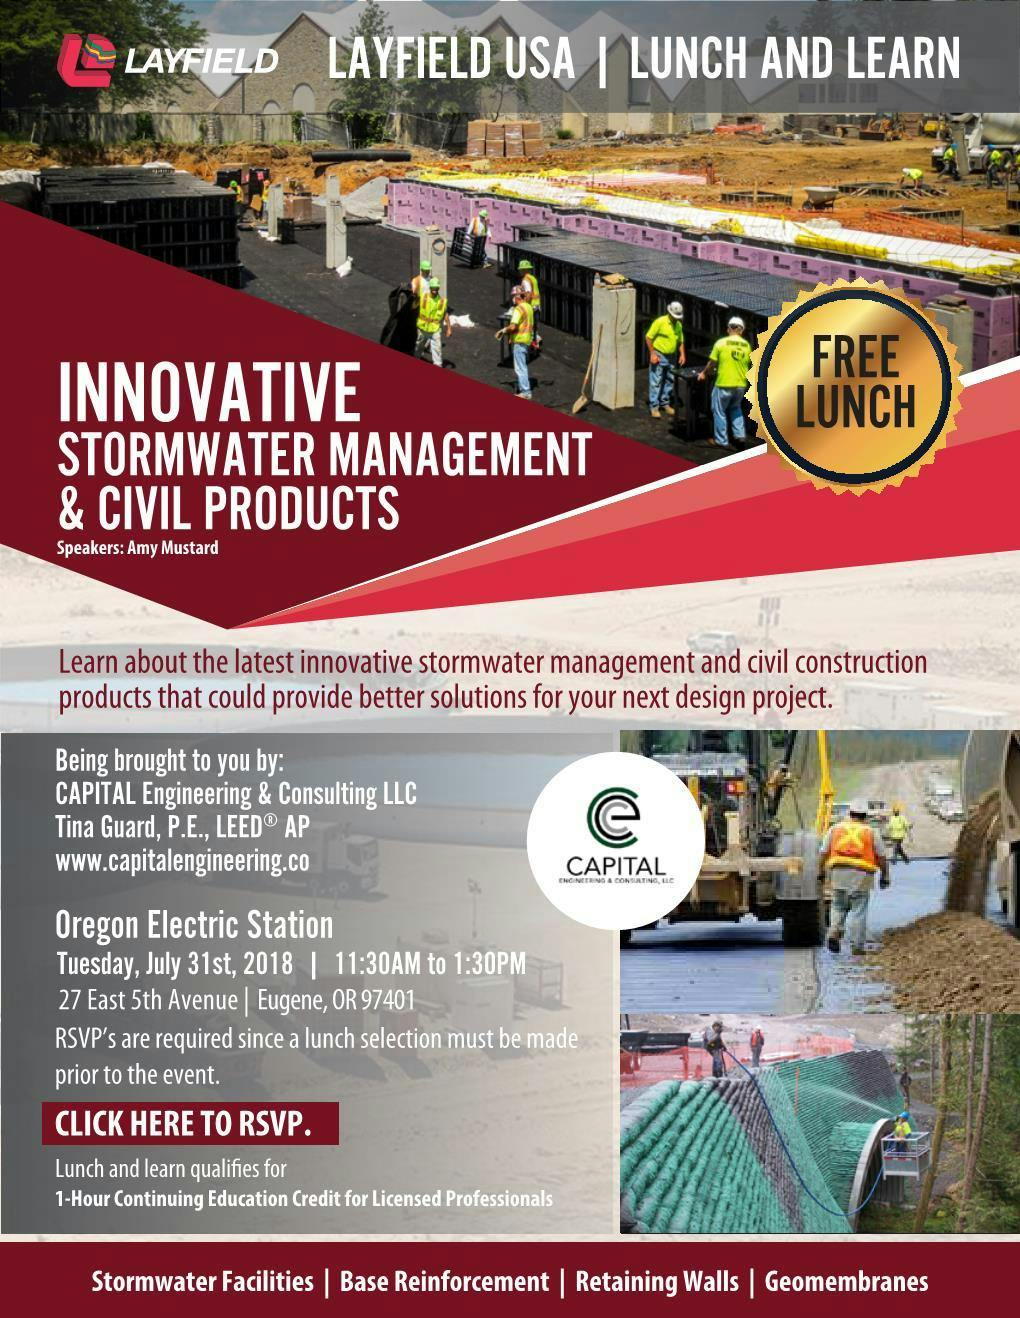 LAYFIELD: INNOVATIVE STORMWATER MANAGEMENT & CIVIL CONSTRUCTION PRODUCTS